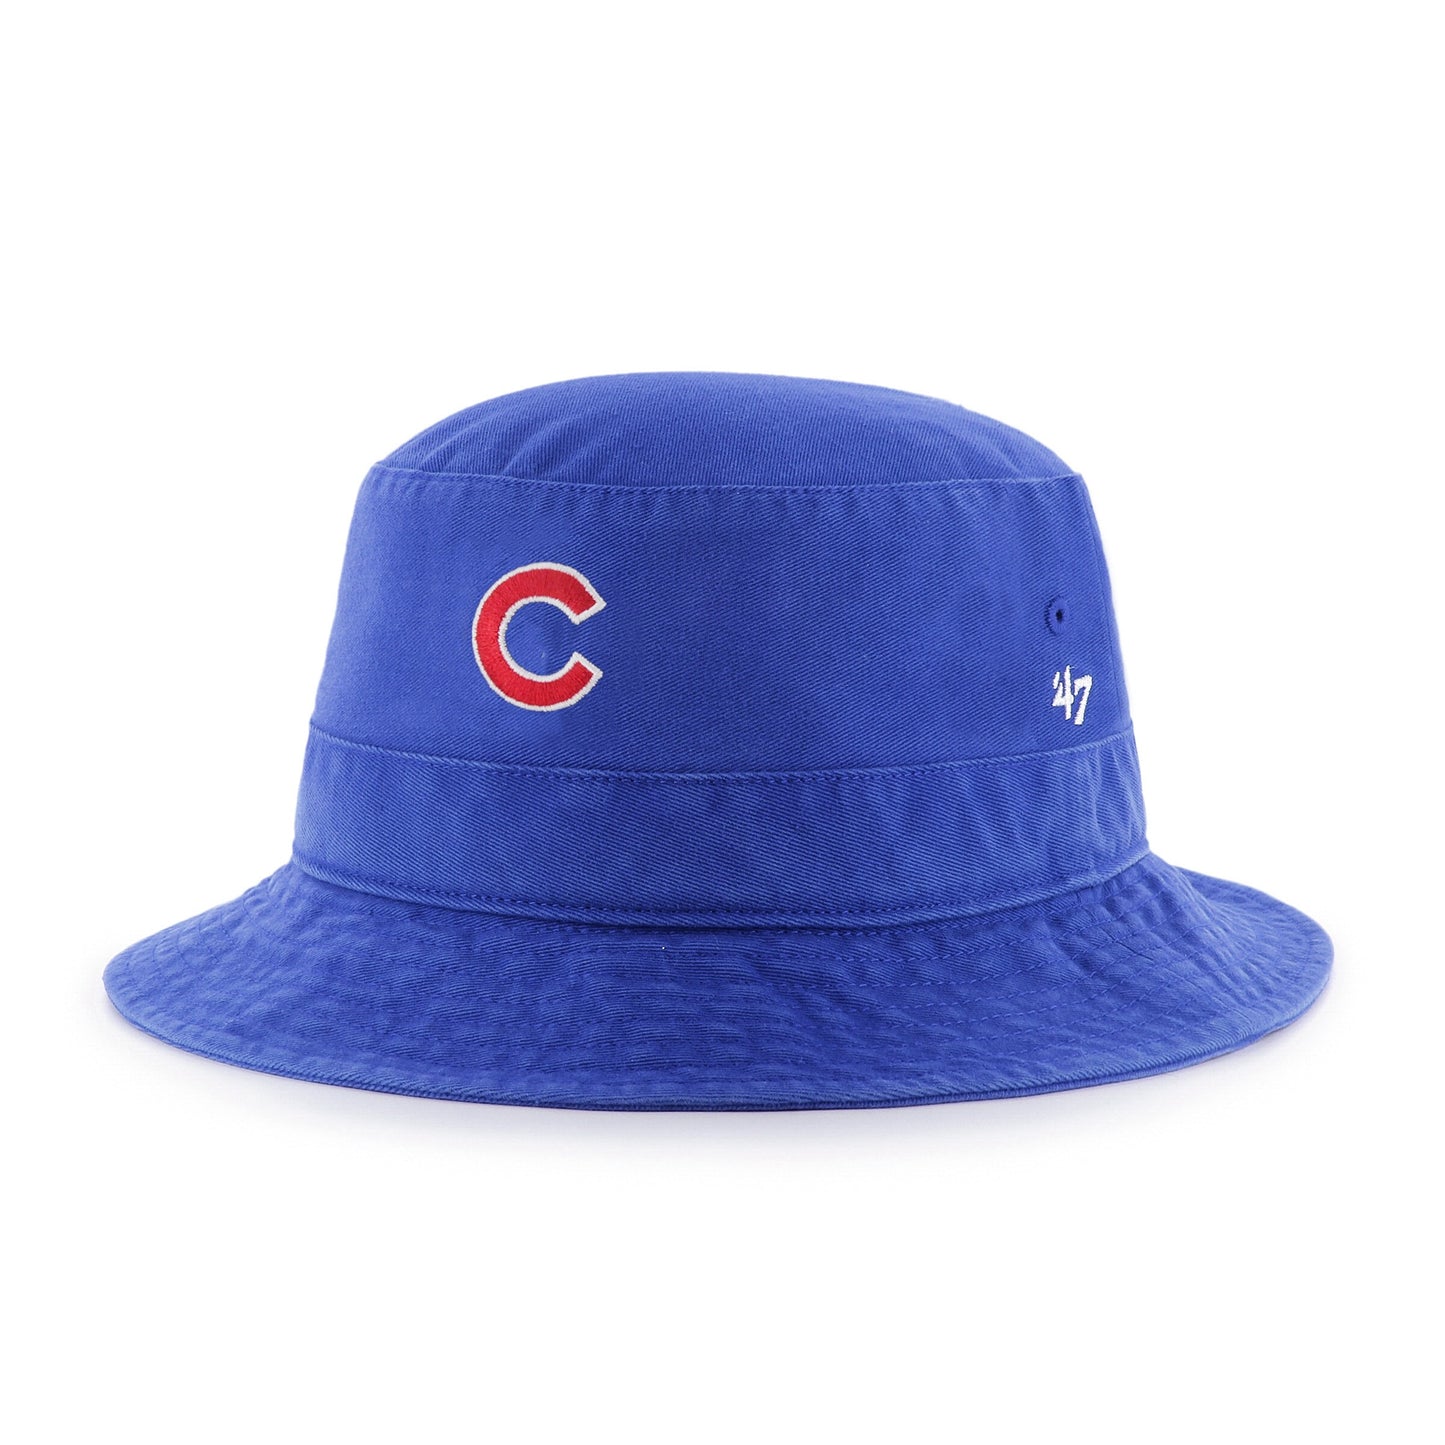 Chicago Cubs '47 Primary Bucket Hat - Royal